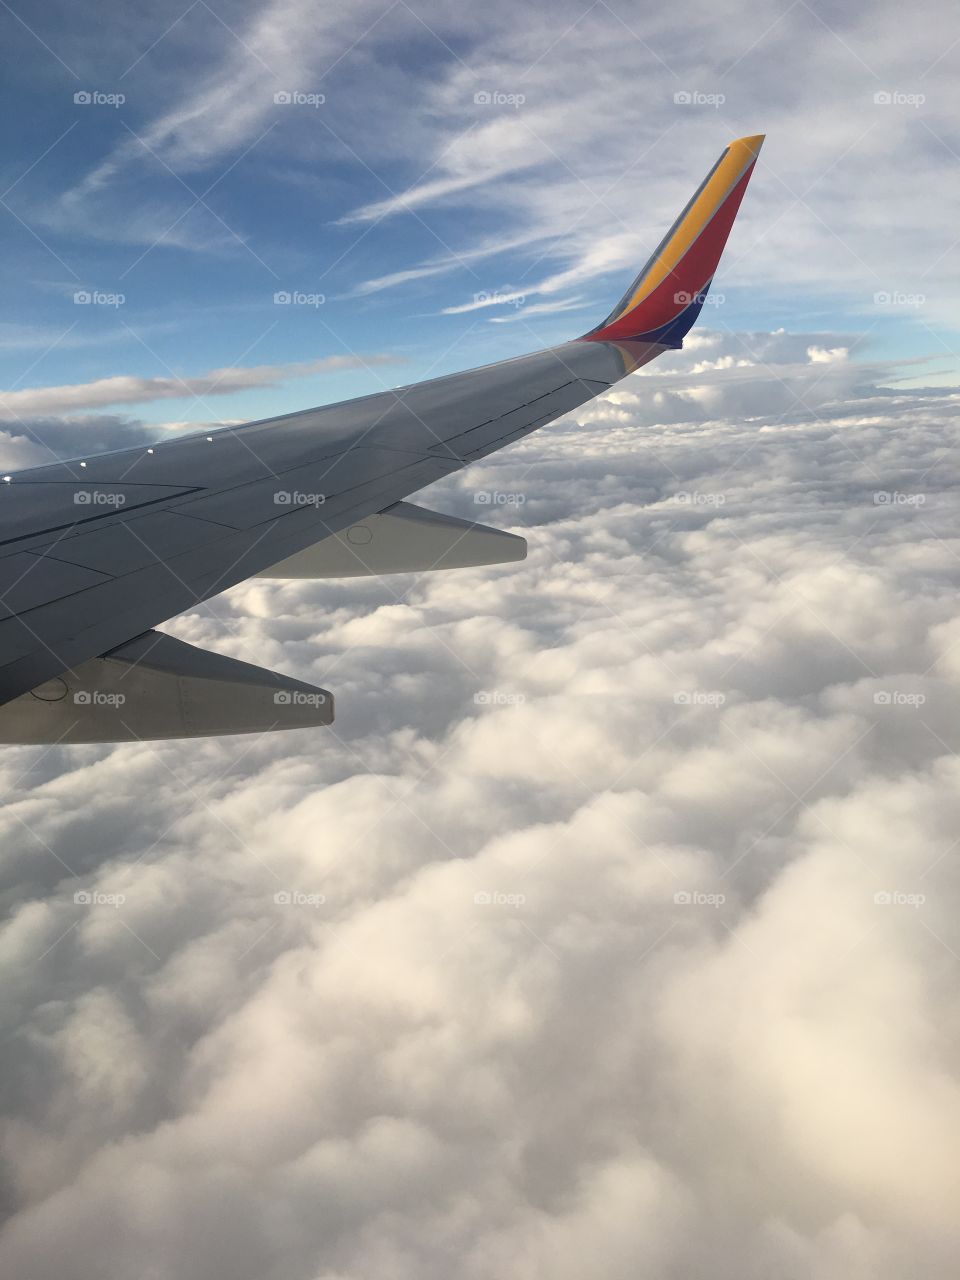 Southwest Airlines in the Clouds 